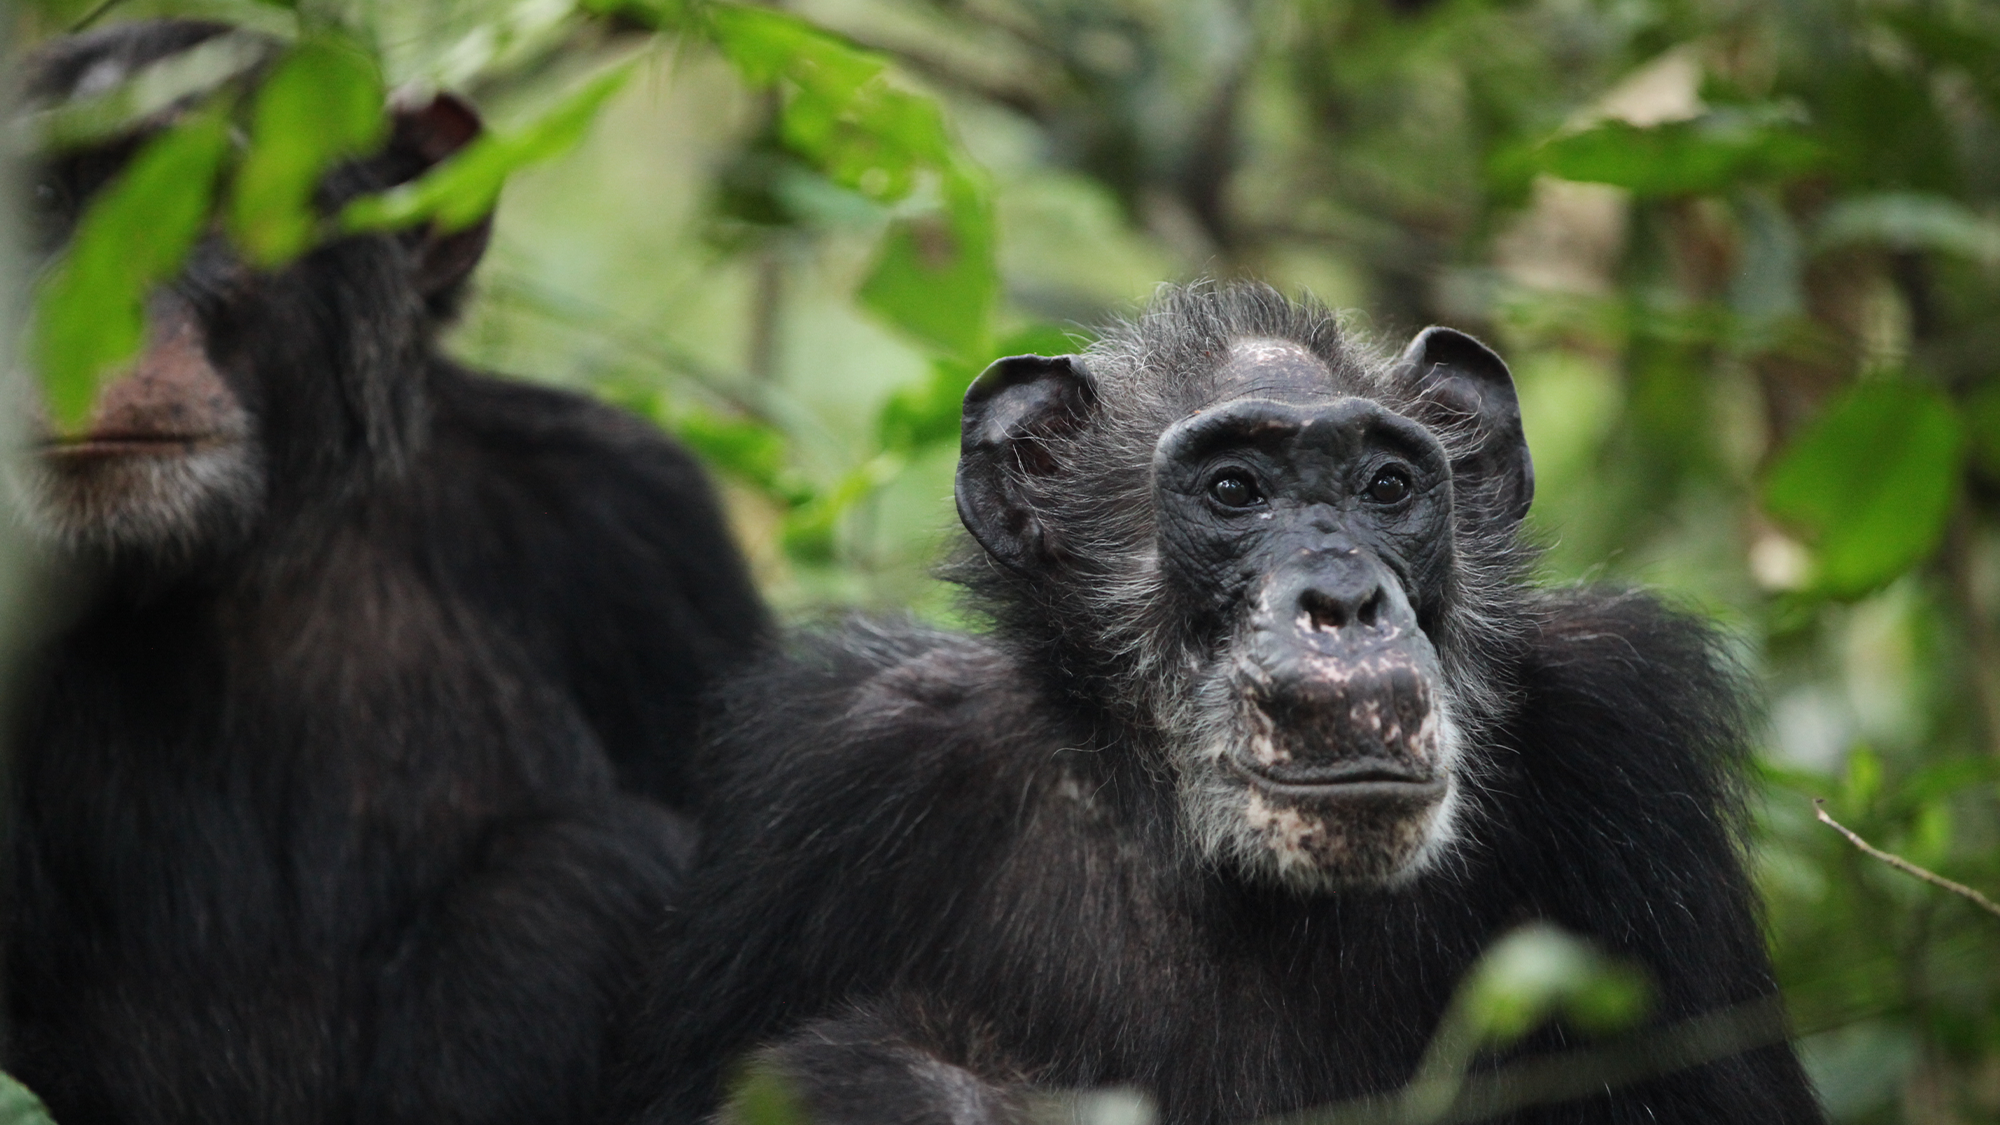 Wild chimpanzees show signs of potential menopause—a rarity in the animal kingdom